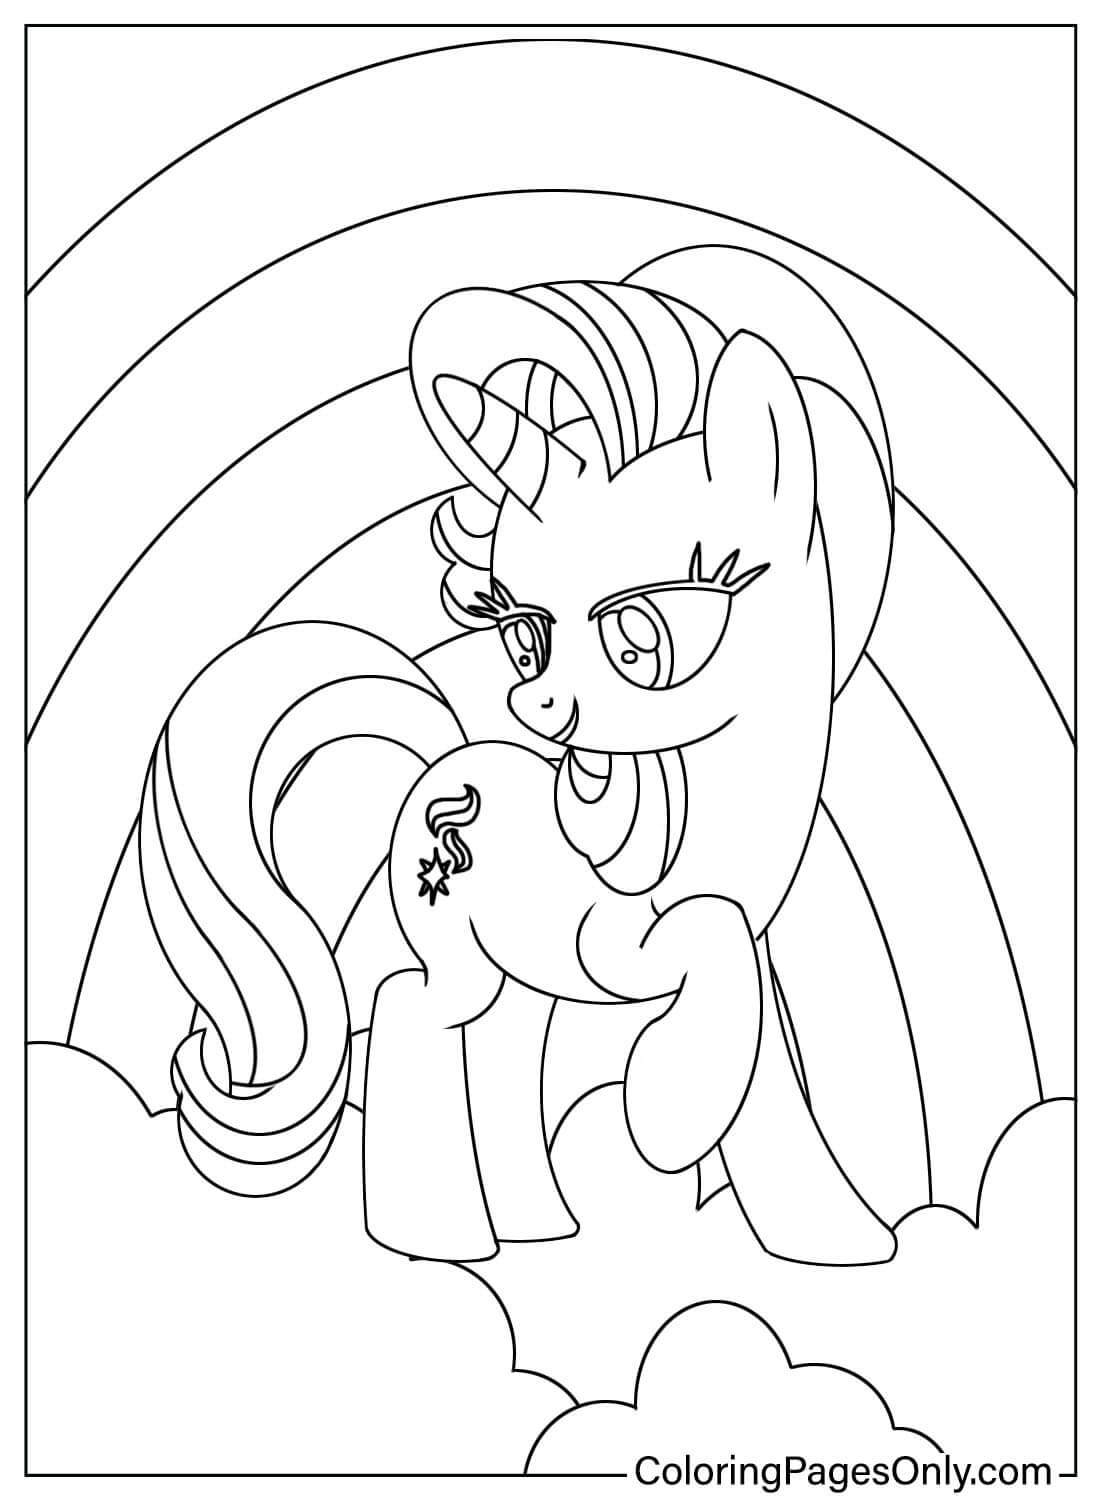 Starlight Glimmer Pony Coloring Page from Starlight Glimmer